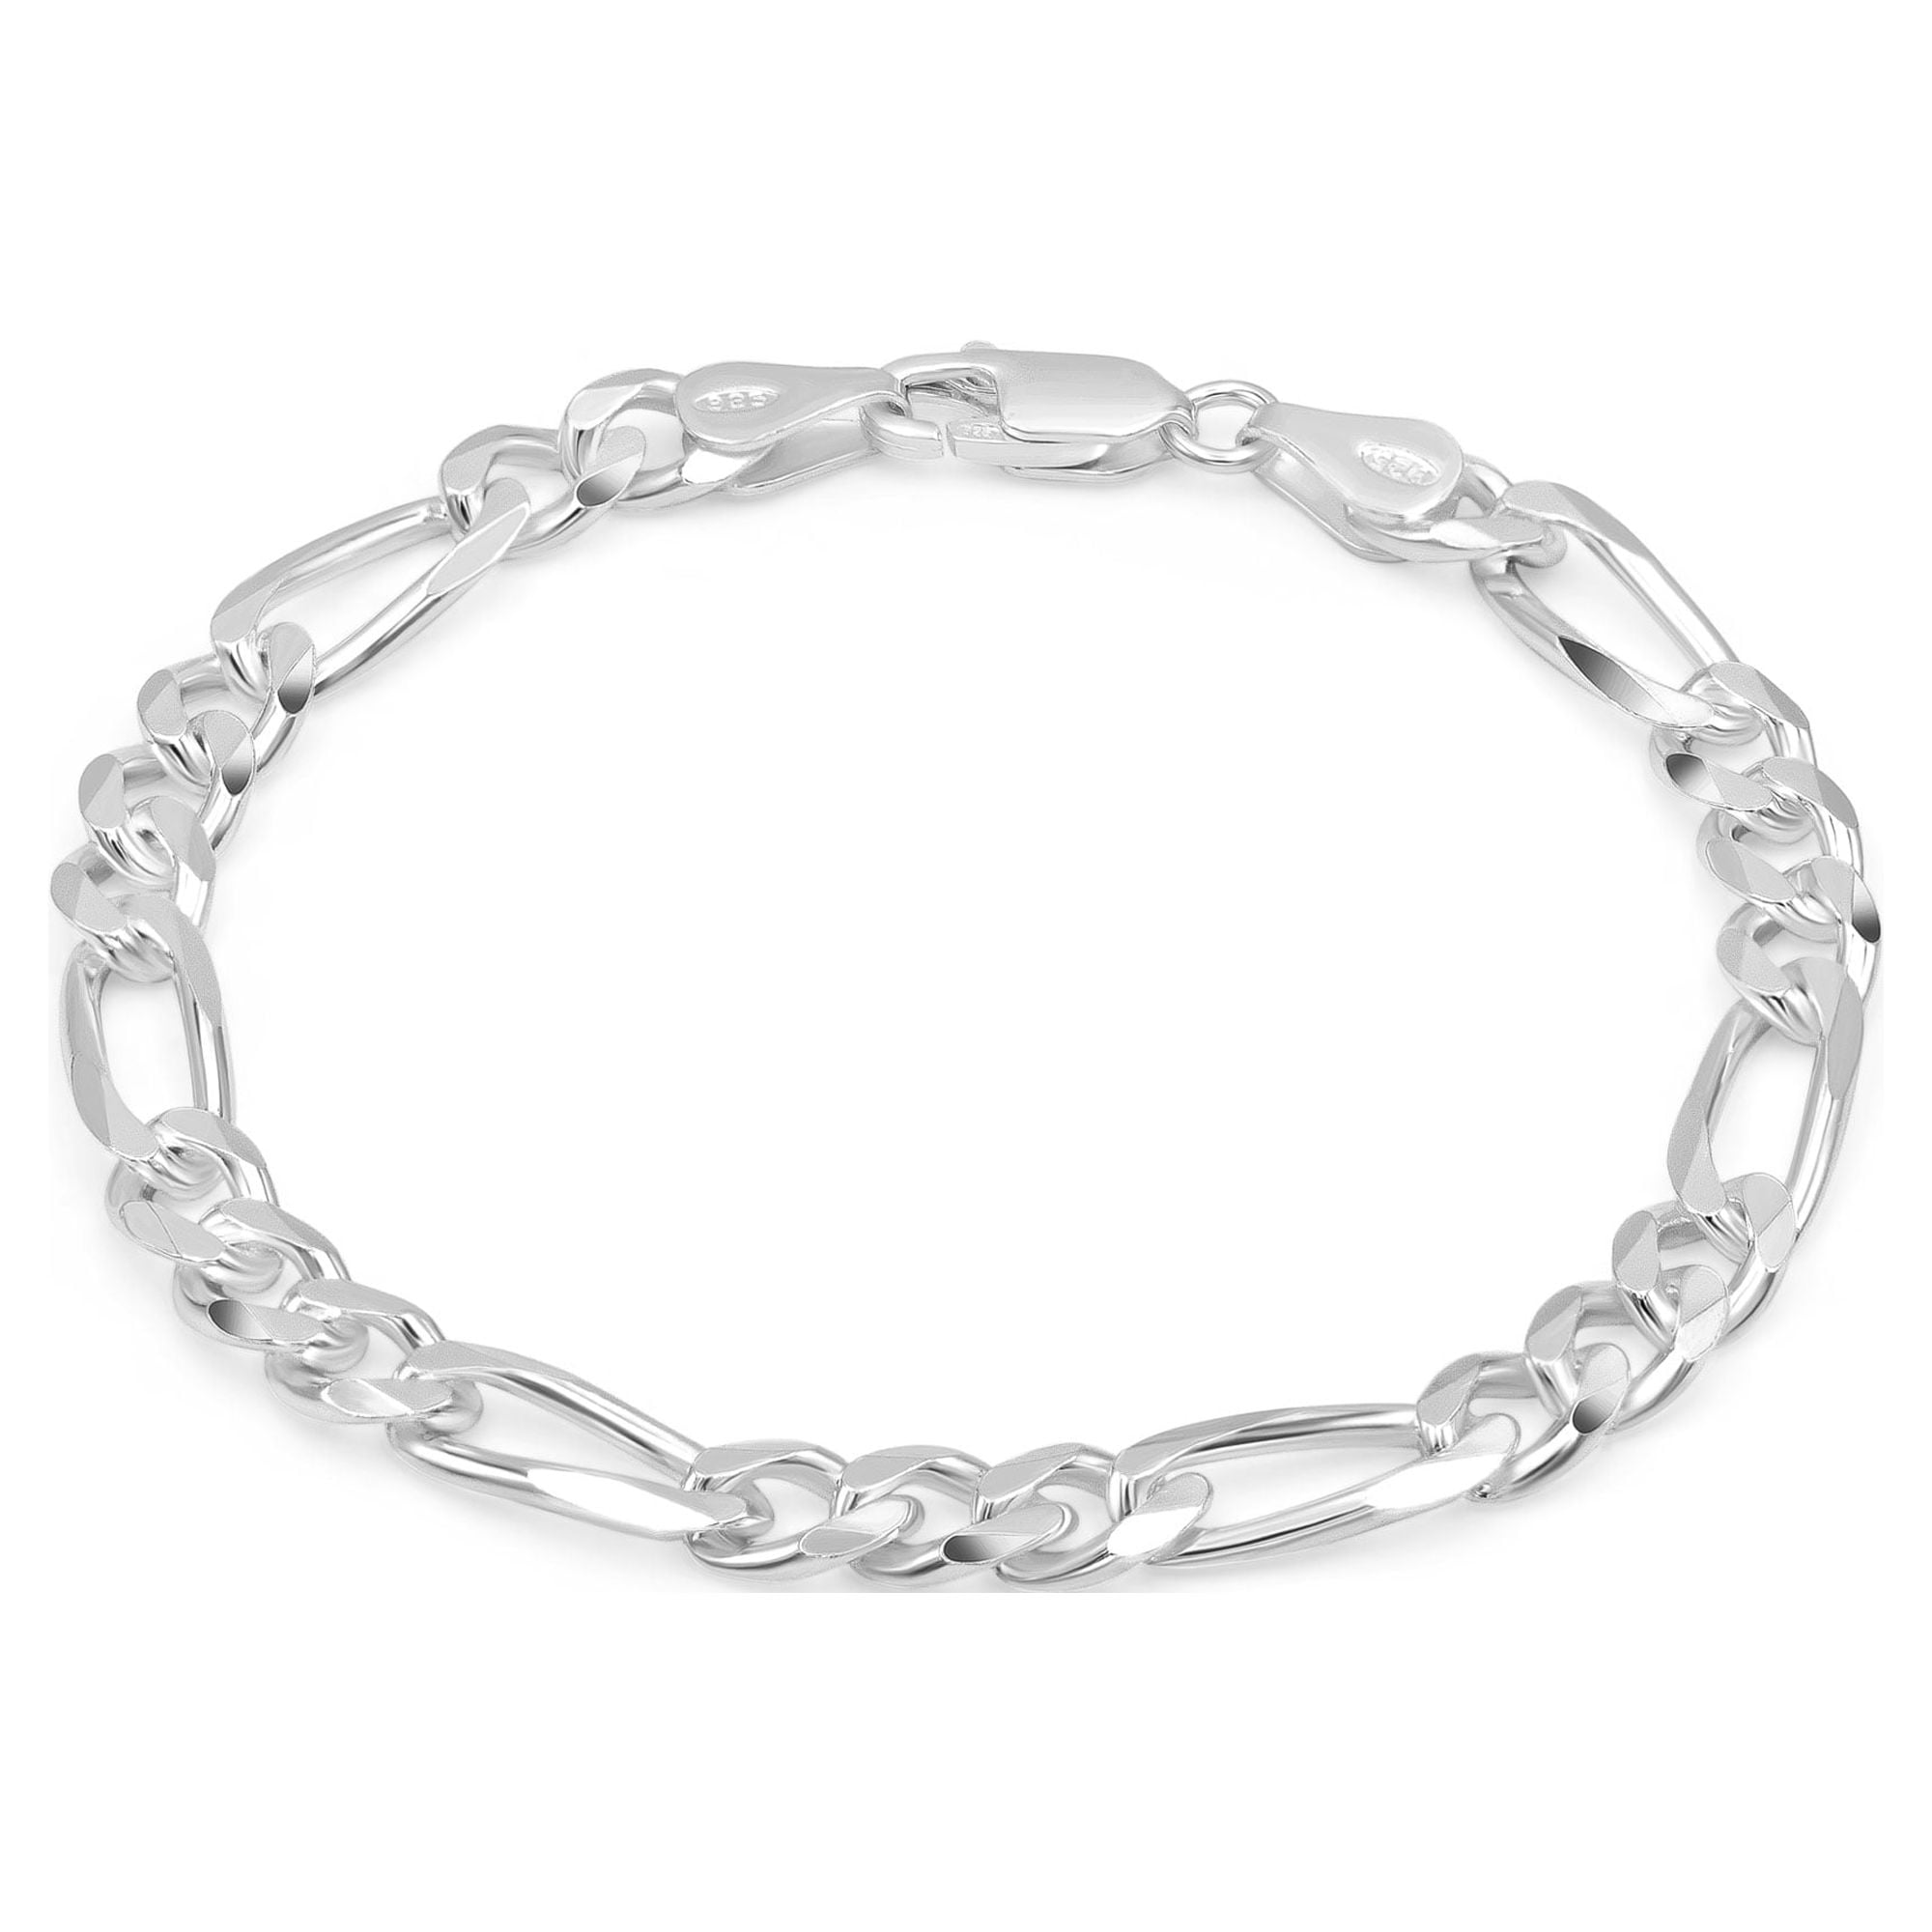 Beautiful Sterling Silver Cuban Link Chain Bracelet in 5mm (Gauge 150)  width. Available in 7 and 8 Lengths.